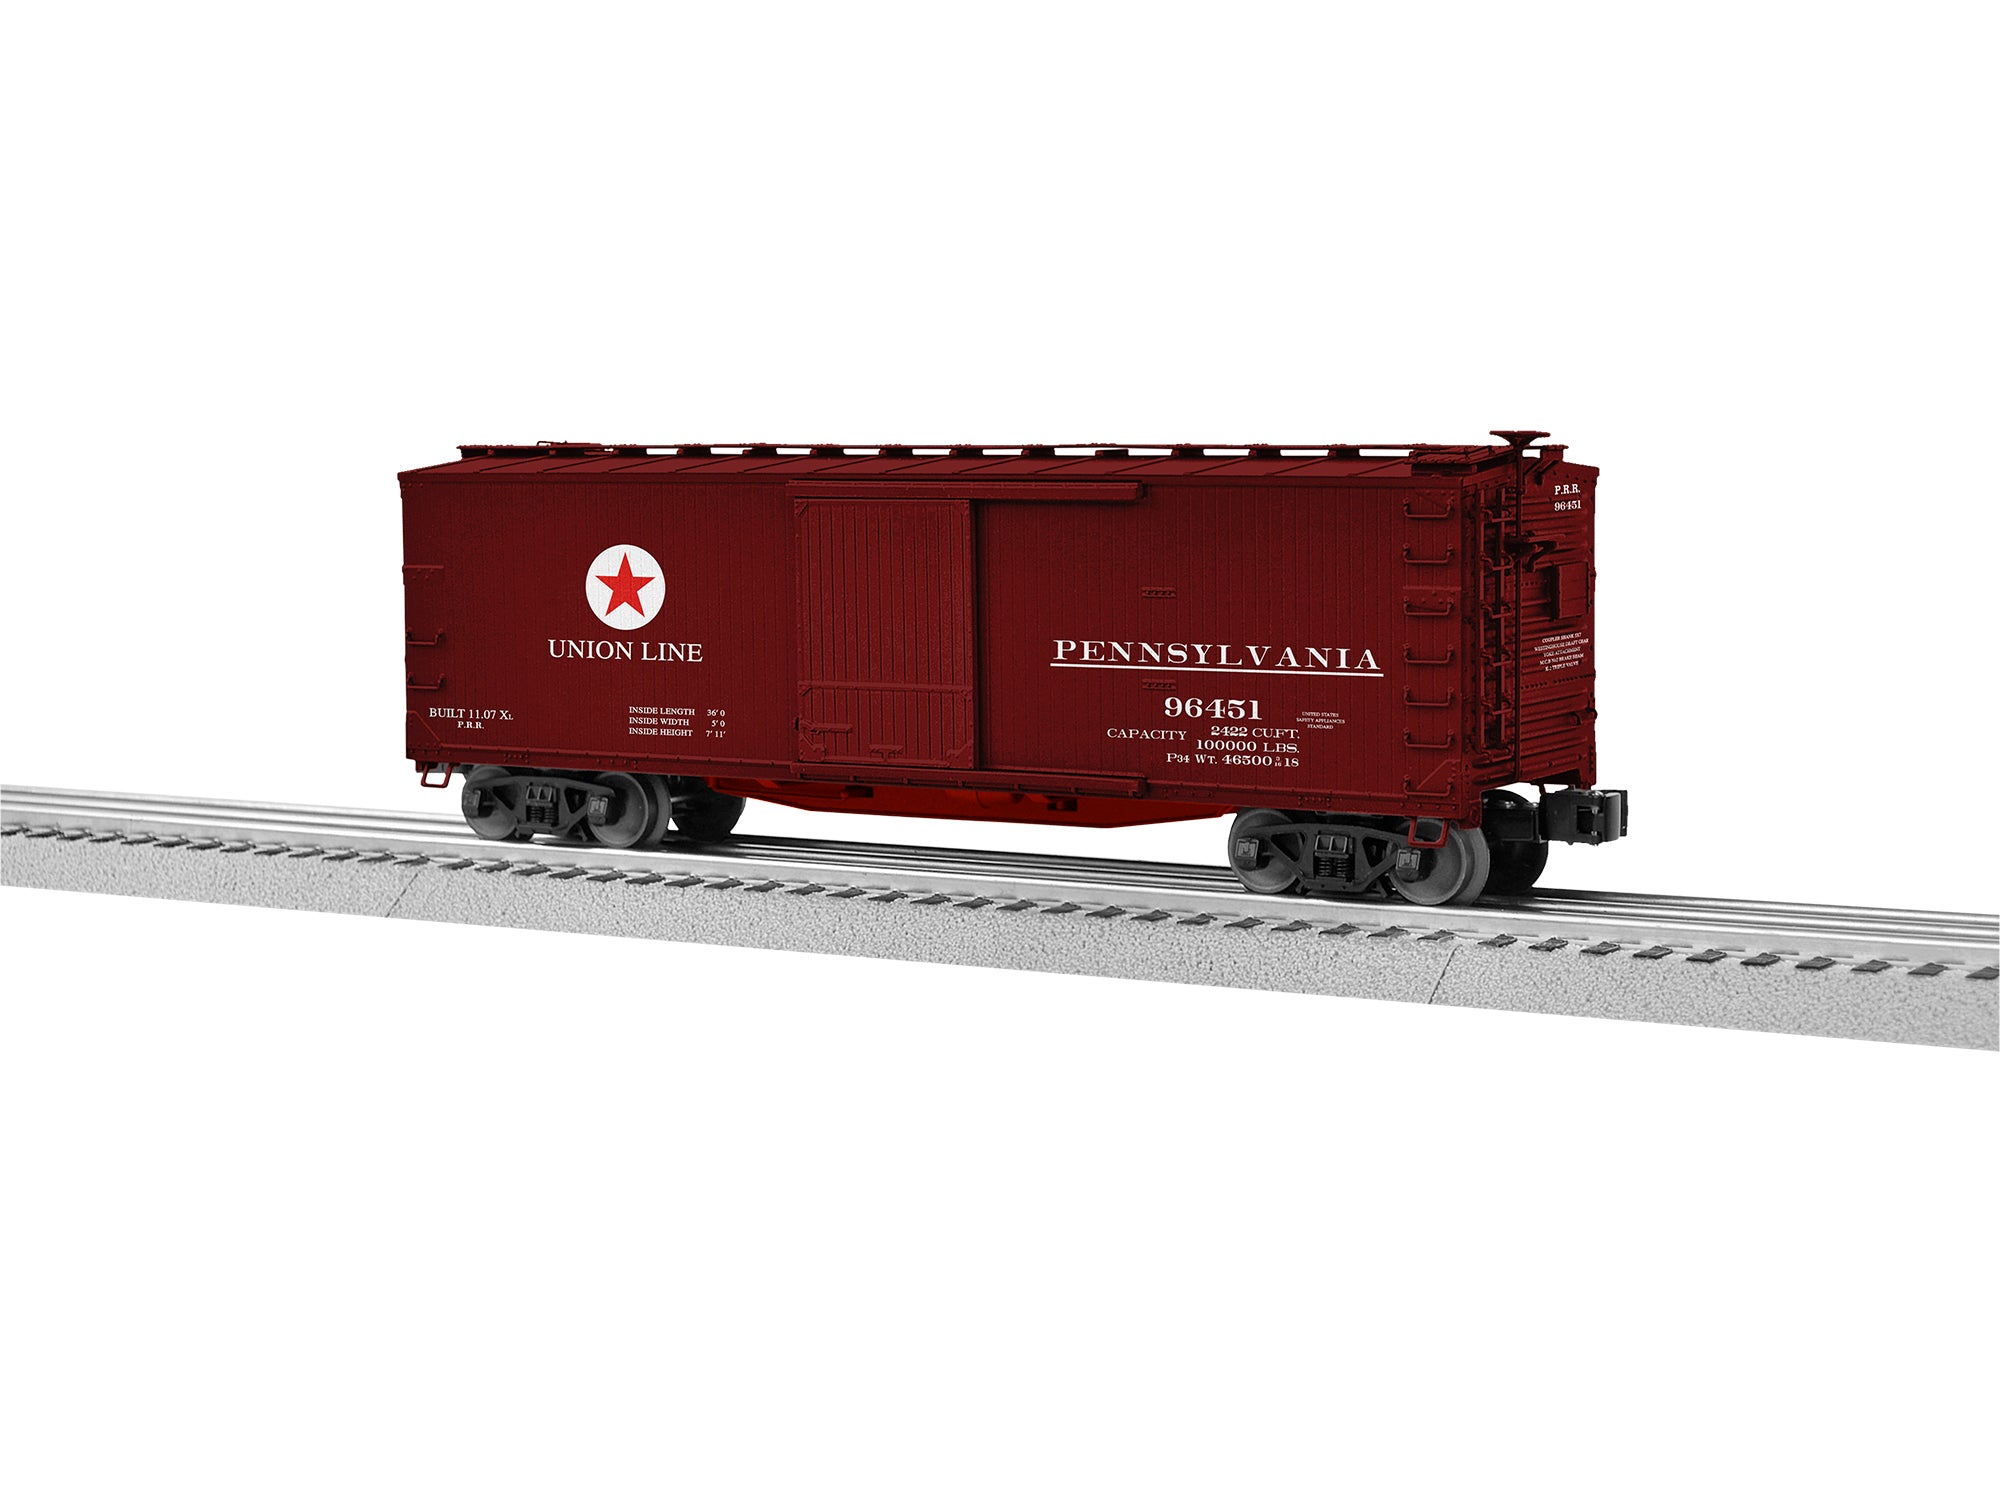 Lionel 2426210 - Double Sheathed Boxcar "Pennsylvania" #96451